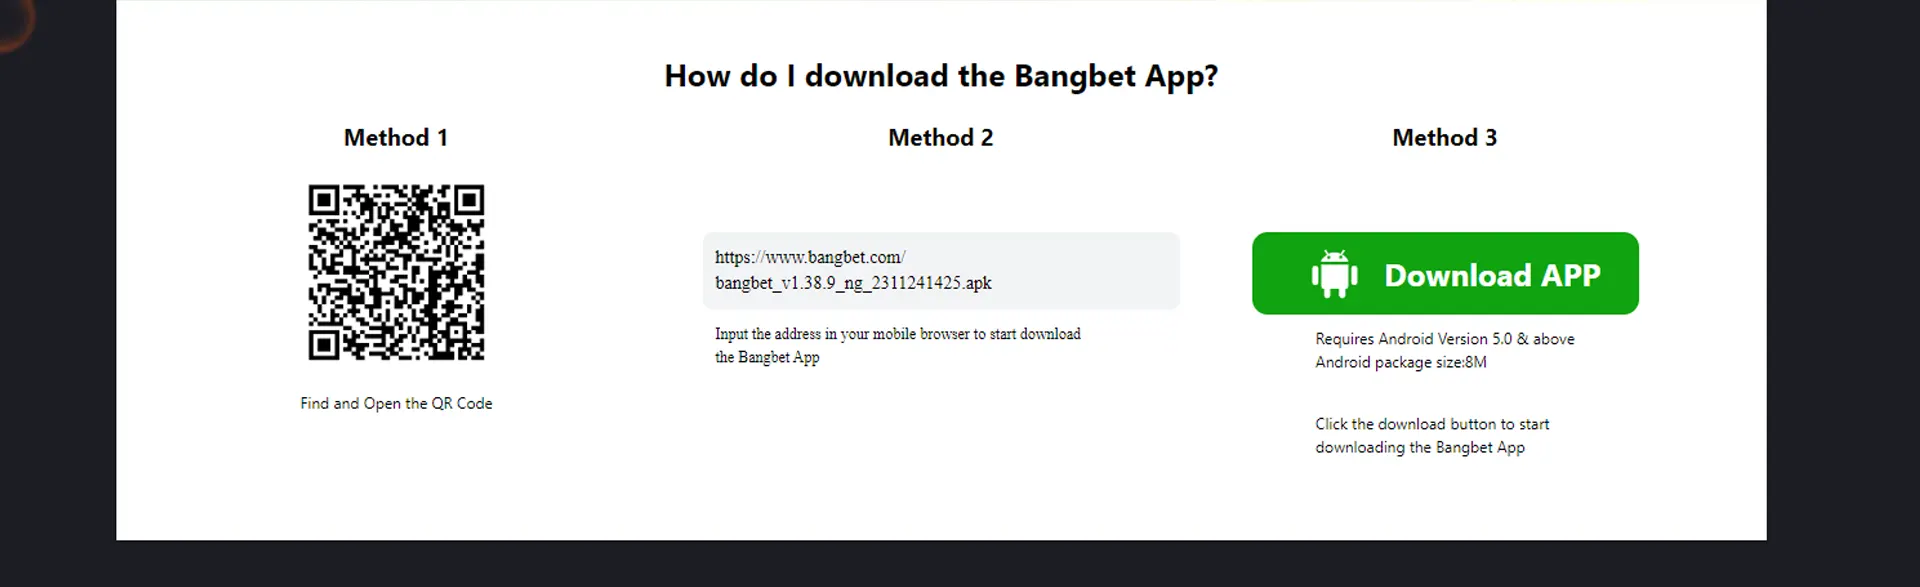 Page with Bangbet App and methods how it downloads.